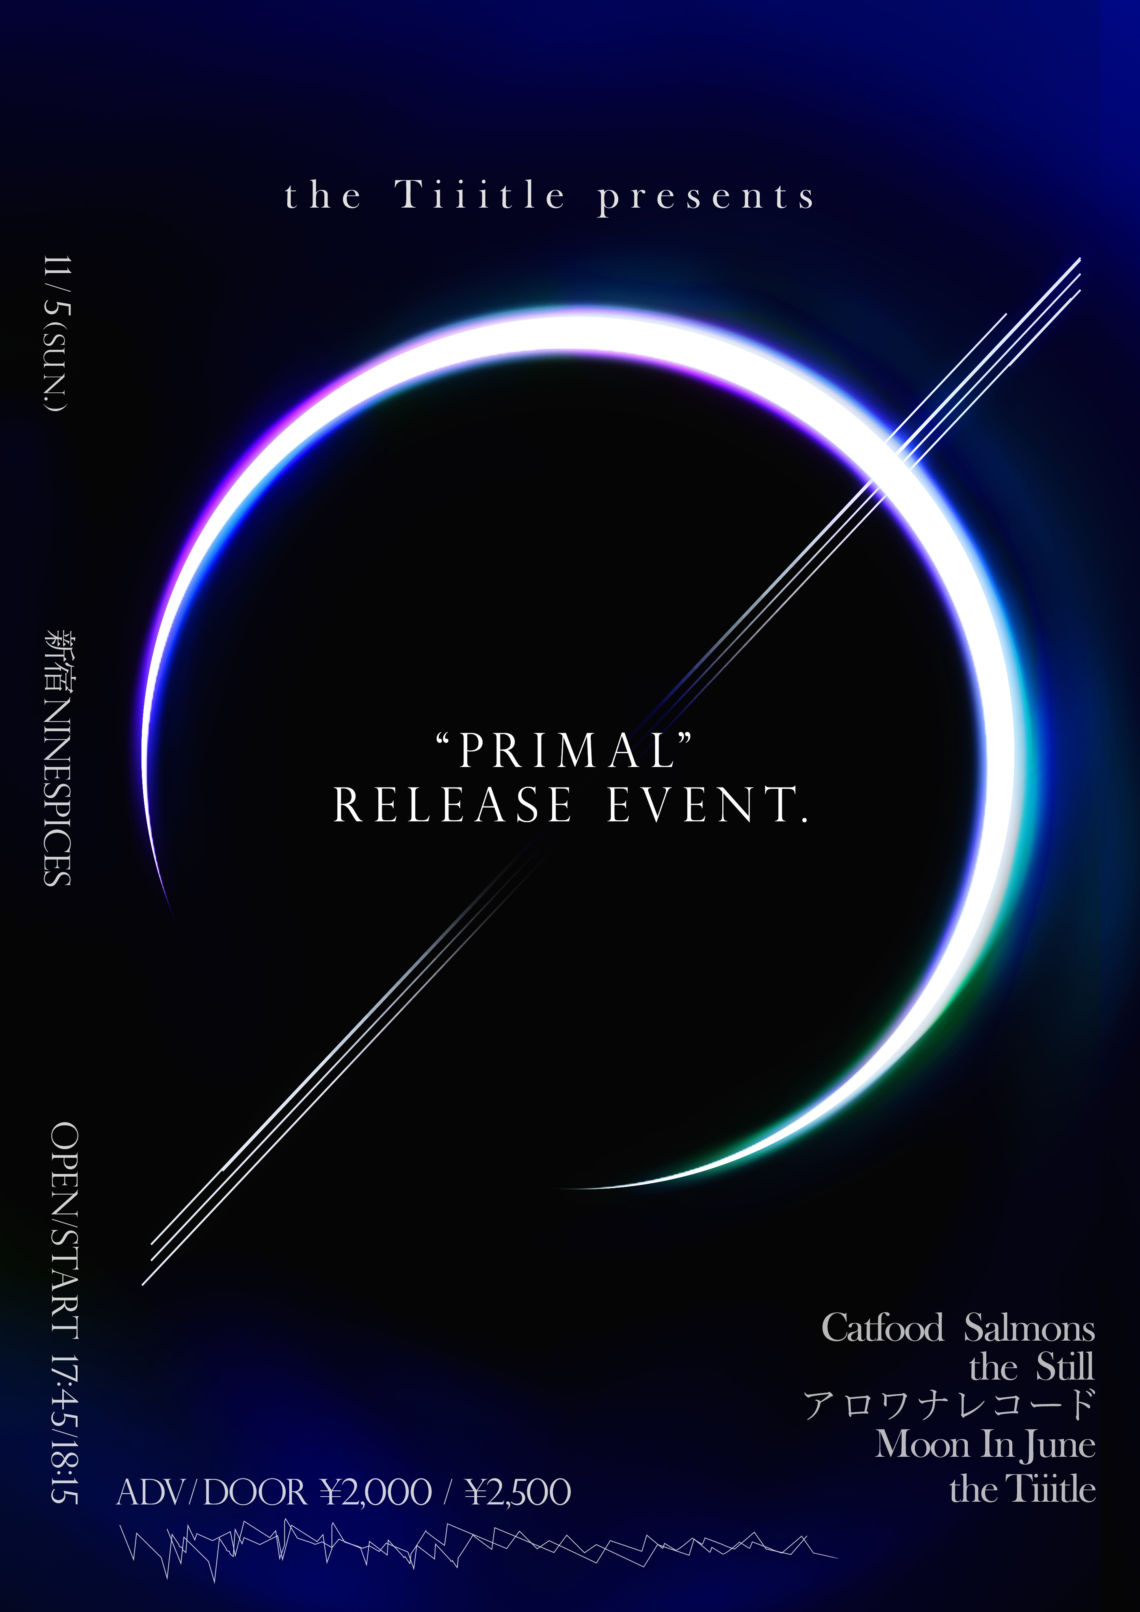 the Tiiitle presents “Primal” release event